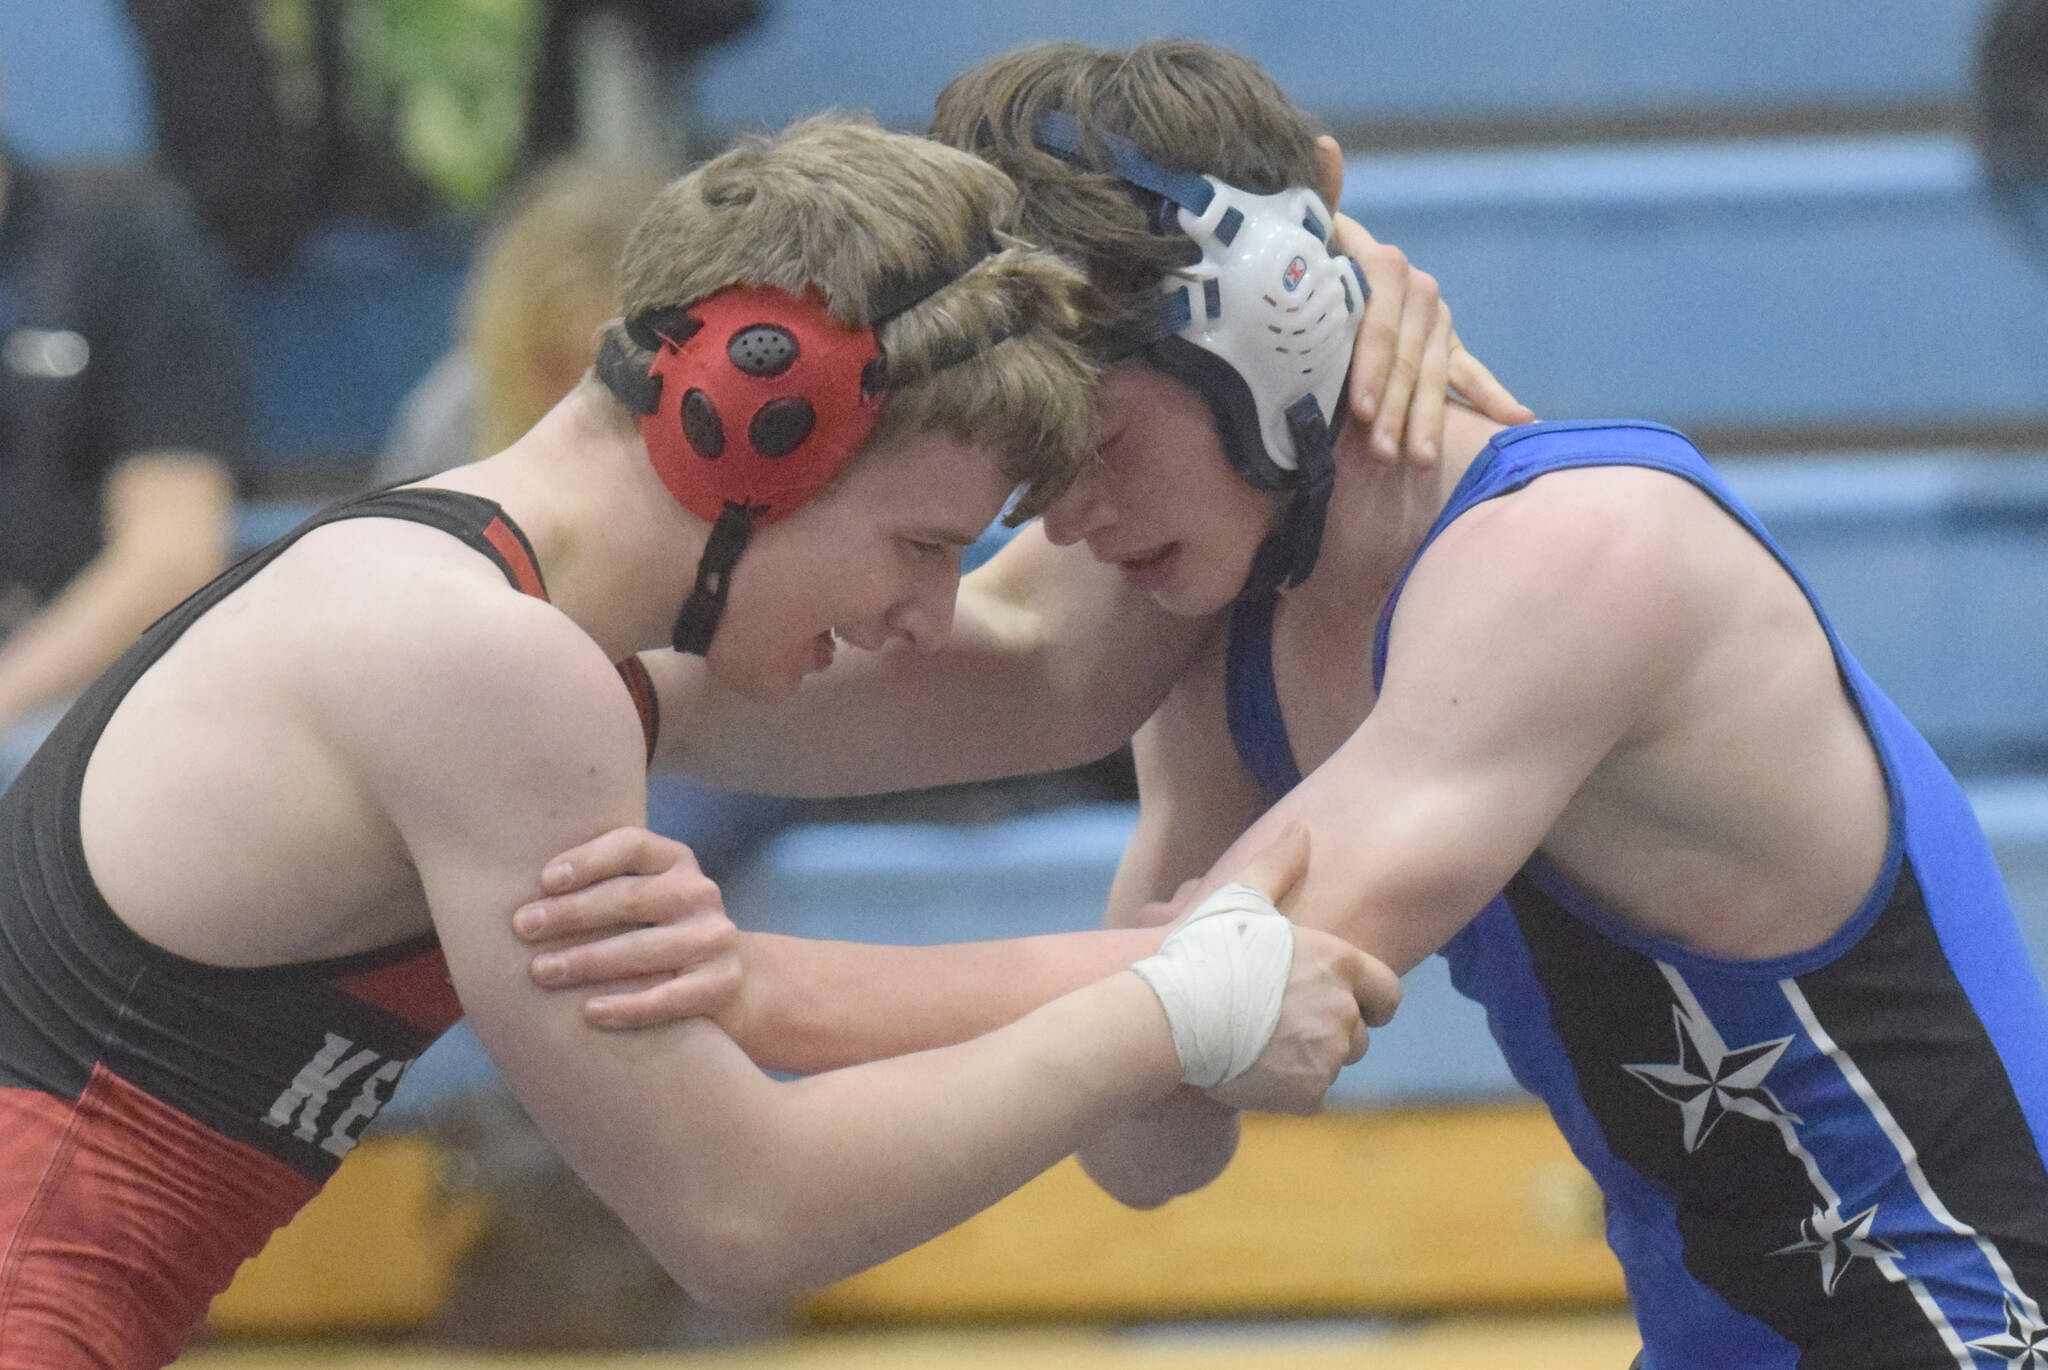 Kenai Central’s Andrew Gaethle and Soldotna’s Collin Peck battle at 160 pounds in a dual meet at Soldotna High School on Tuesday, Nov. 30, 2021, in Soldotna, Alaska. Gaethle notched an 8-3 decision.